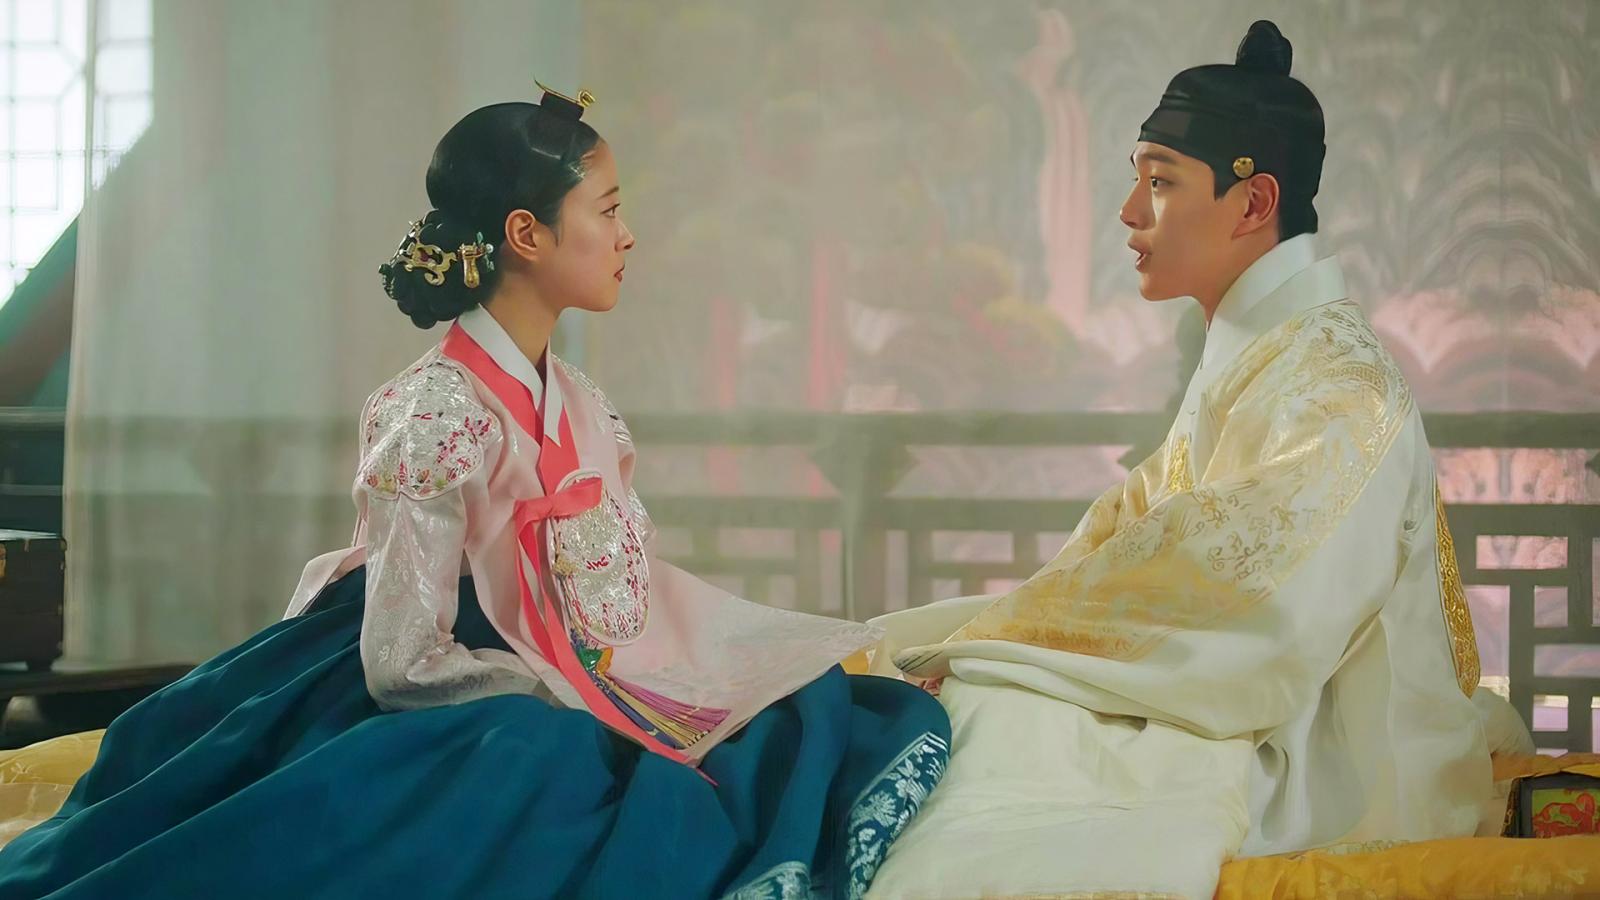 7 Historical K-Dramas to Watch While Waiting for My Dearest Part 2 Premiere - image 6